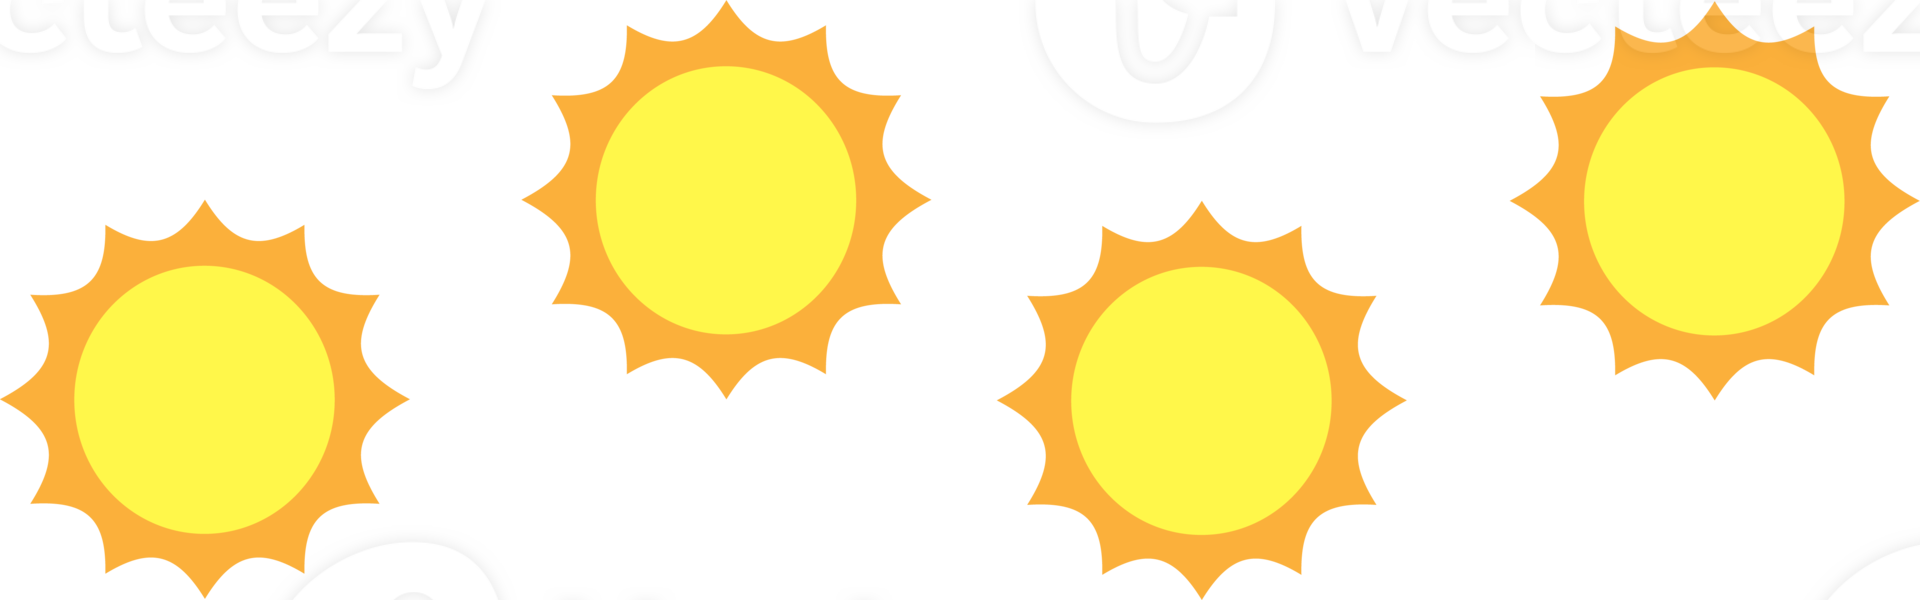 Sun Weather icon pattern  design elements illustration png